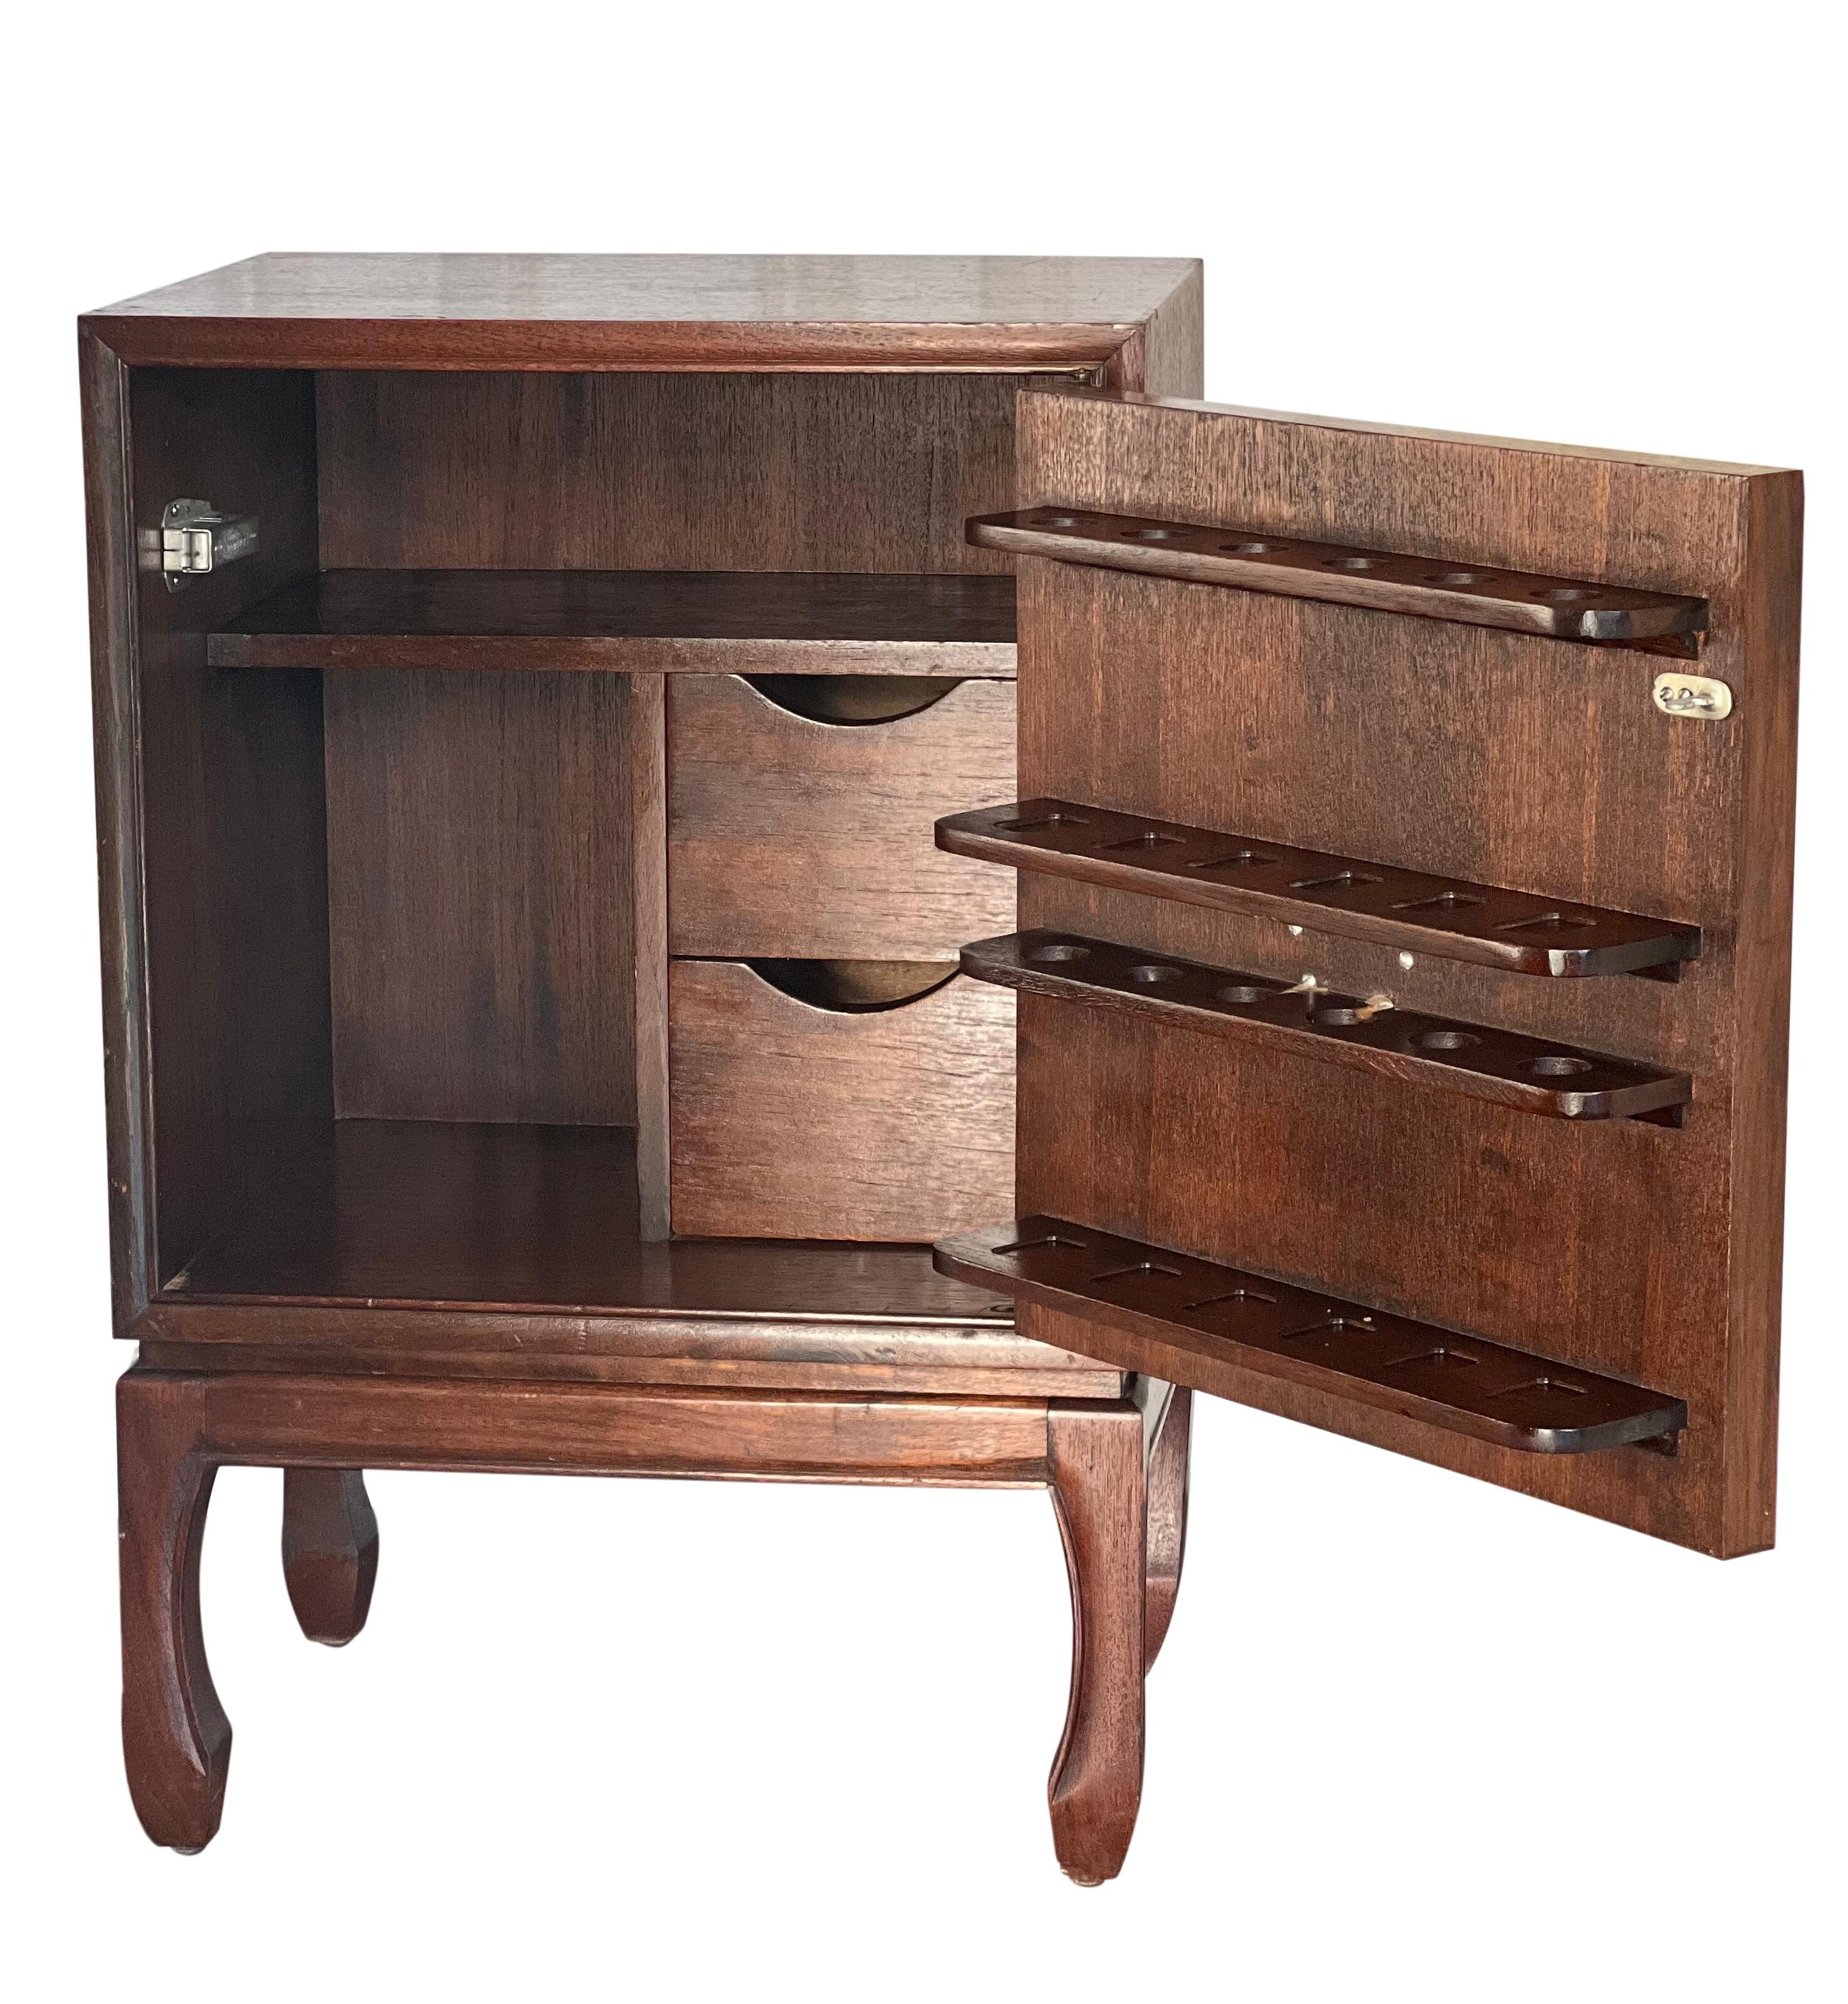 Asian style petite pipe and tobacco cabinet, early 20th century.

This Ming style cabinet features a single tiger maple panel door with original Feng Shui brass medallion hardware, a finished back and a touch latch mechanism (push to open, push to